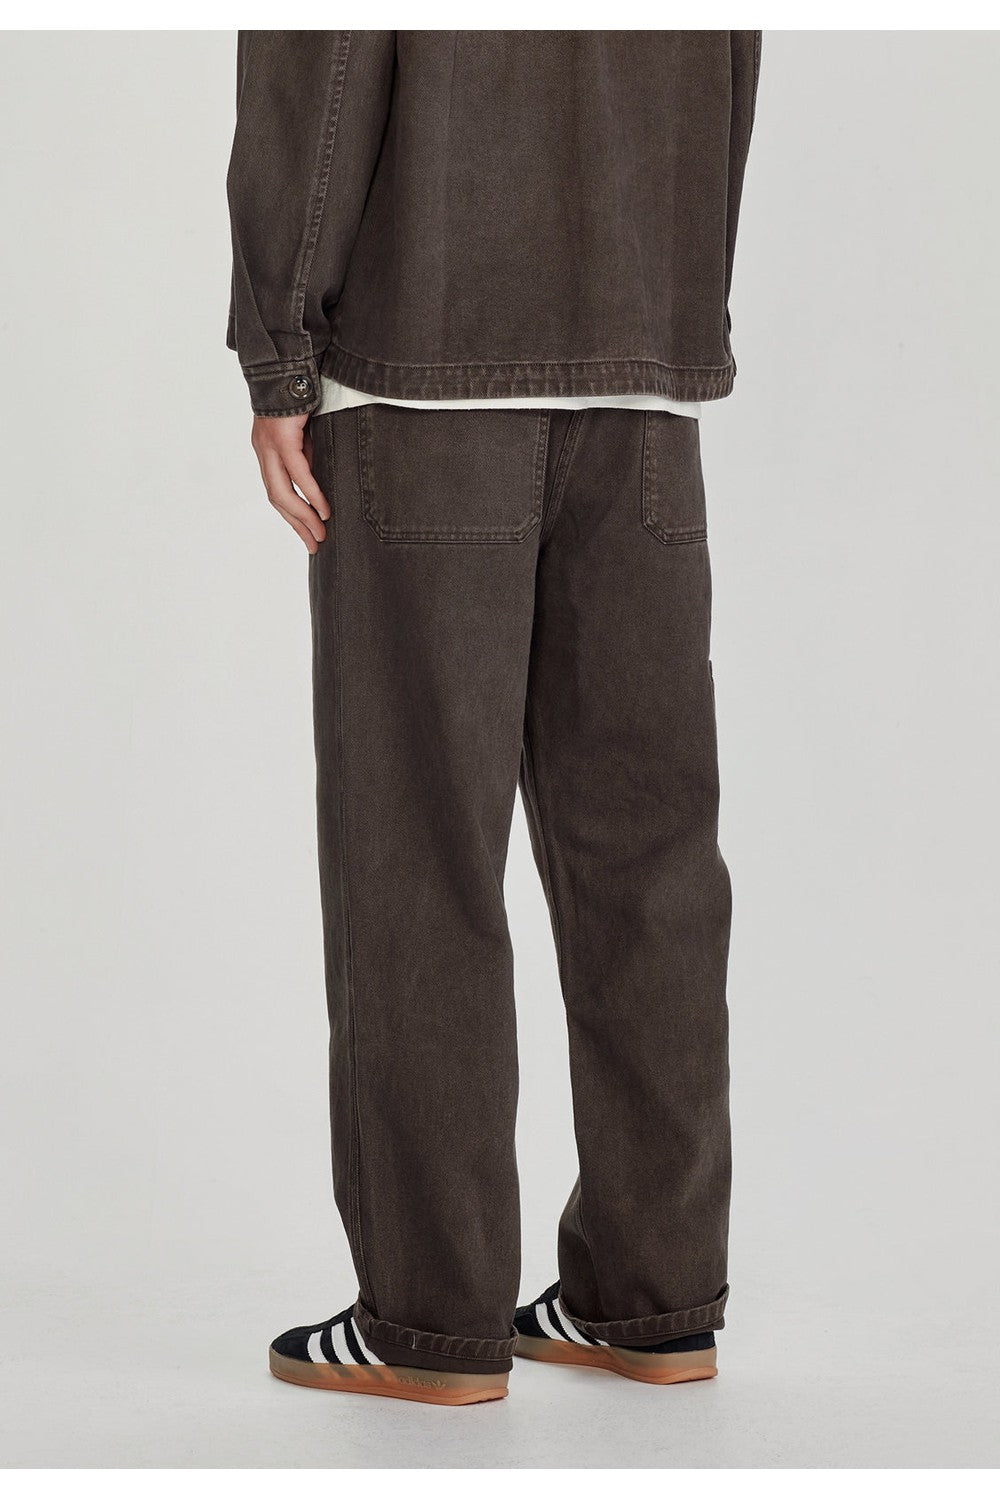 Mens Drill Work Pant - Vintage Cocoa | COMMONERS | Mad About The Boy